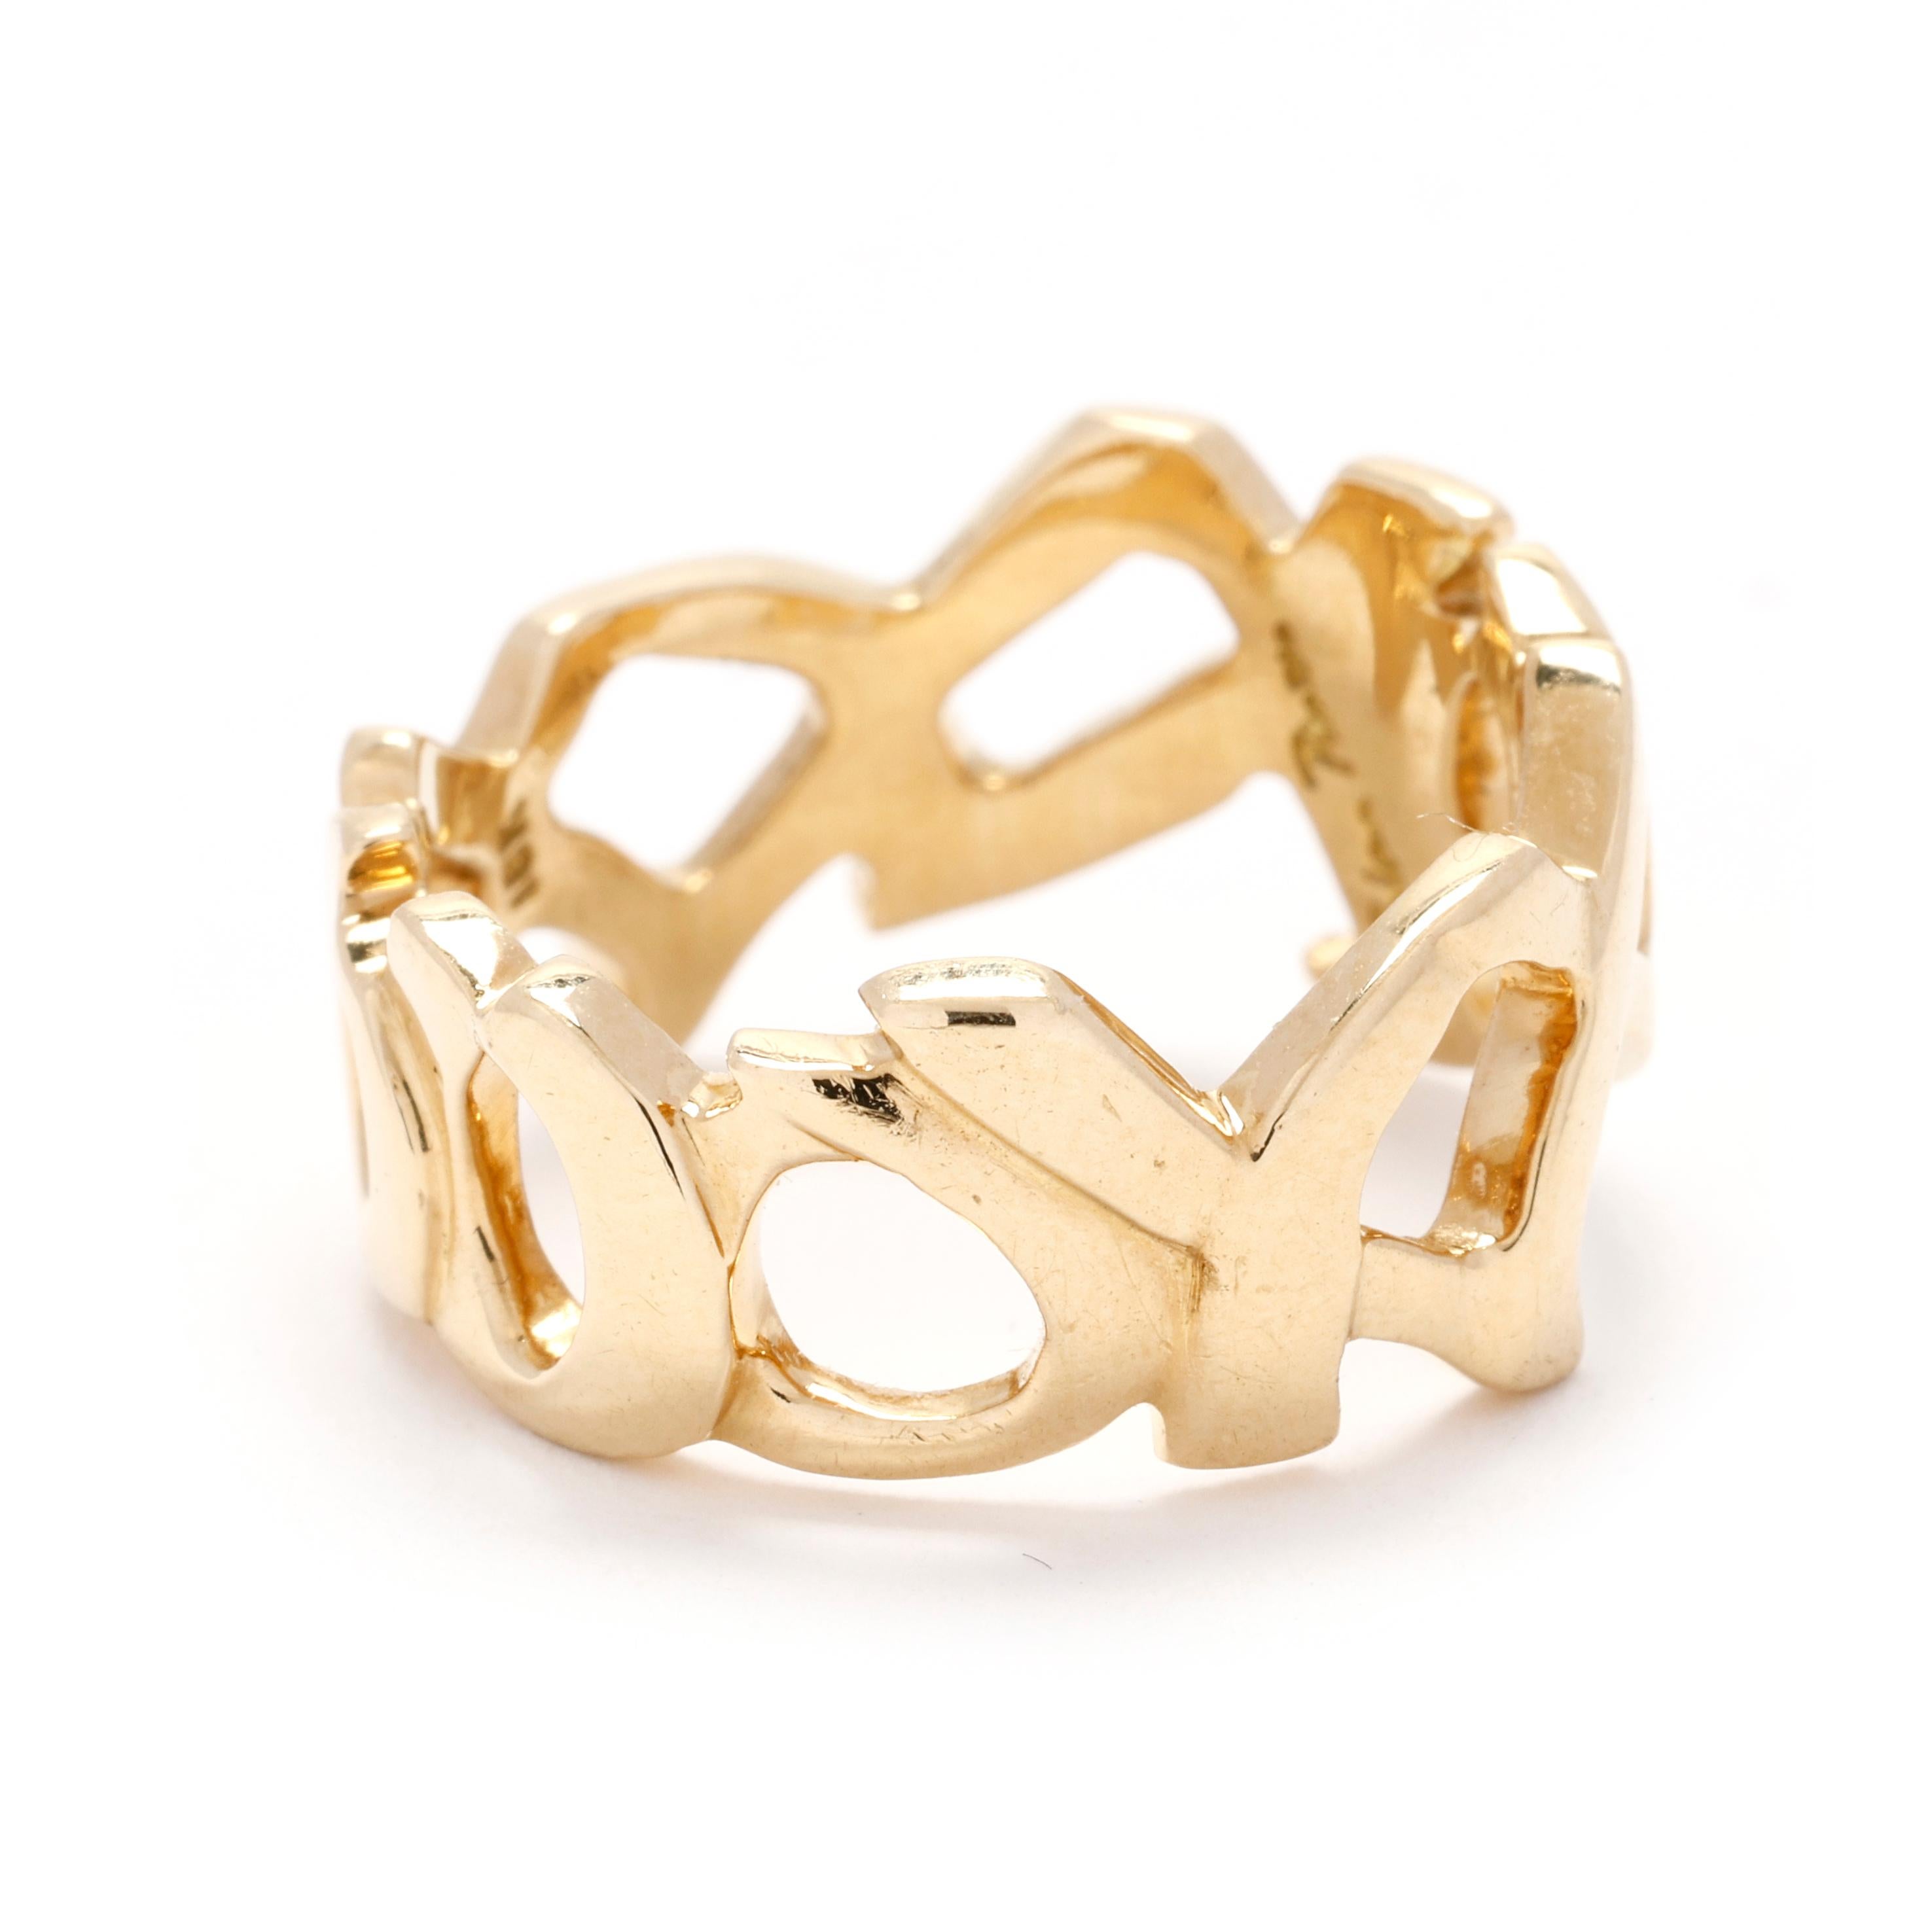 Celebrate love and luxury with this iconic Tiffany & Co Paloma Picasso XO Gold Ring. Meticulously crafted in lustrous 18k yellow gold, this elegant ring features a unique XO design inspired by Paloma Picasso's passion for art and romance, making it